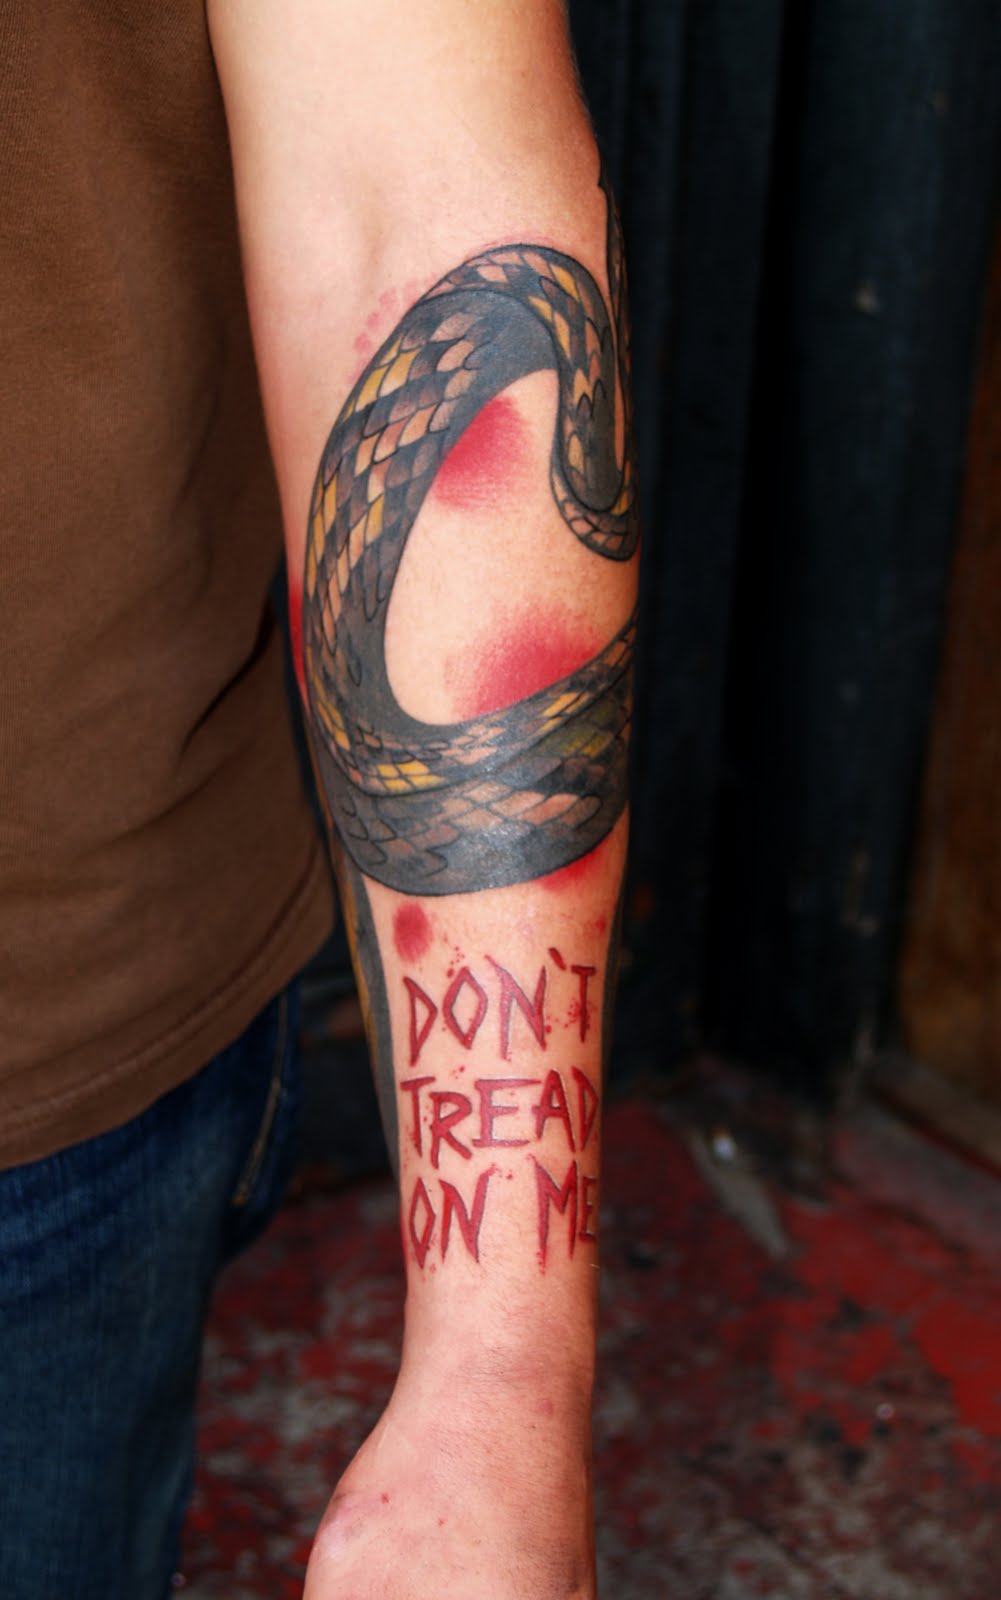 Don T Tread On Me Tattoo Pictures to Pin on Pinterest  TattoosKid